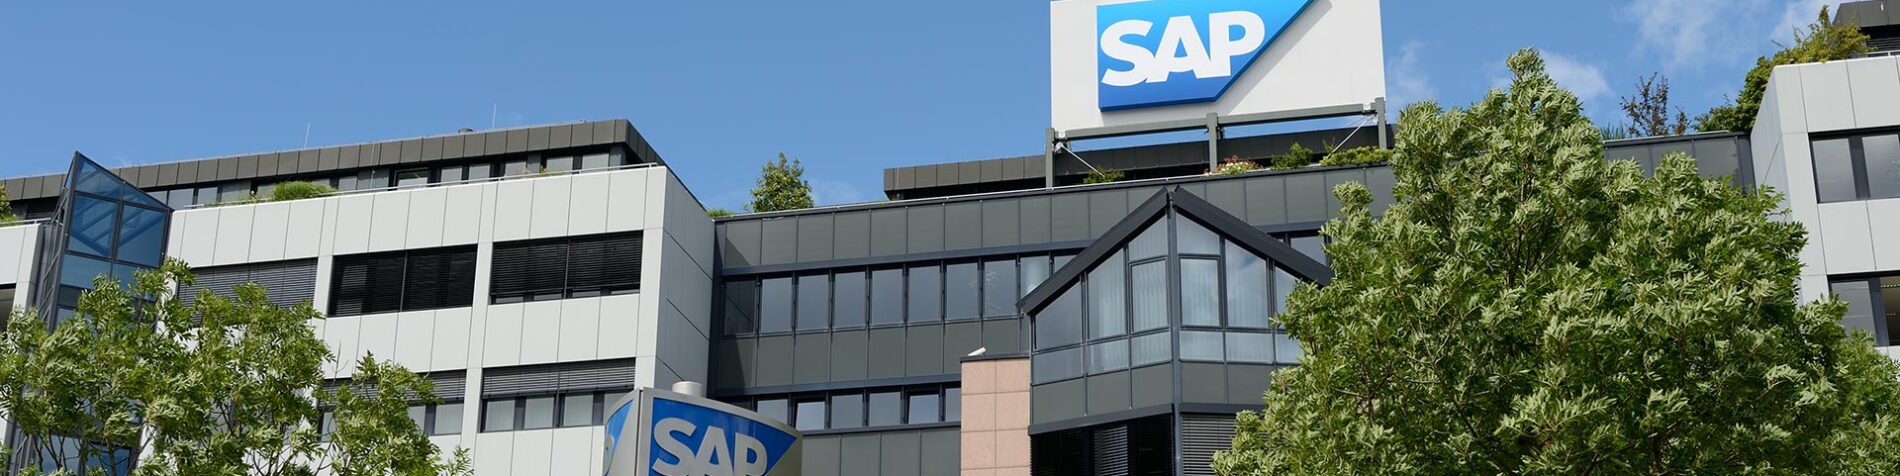 SAP Announces Preliminary Fourth Quarter and Full-Year 2019 Results